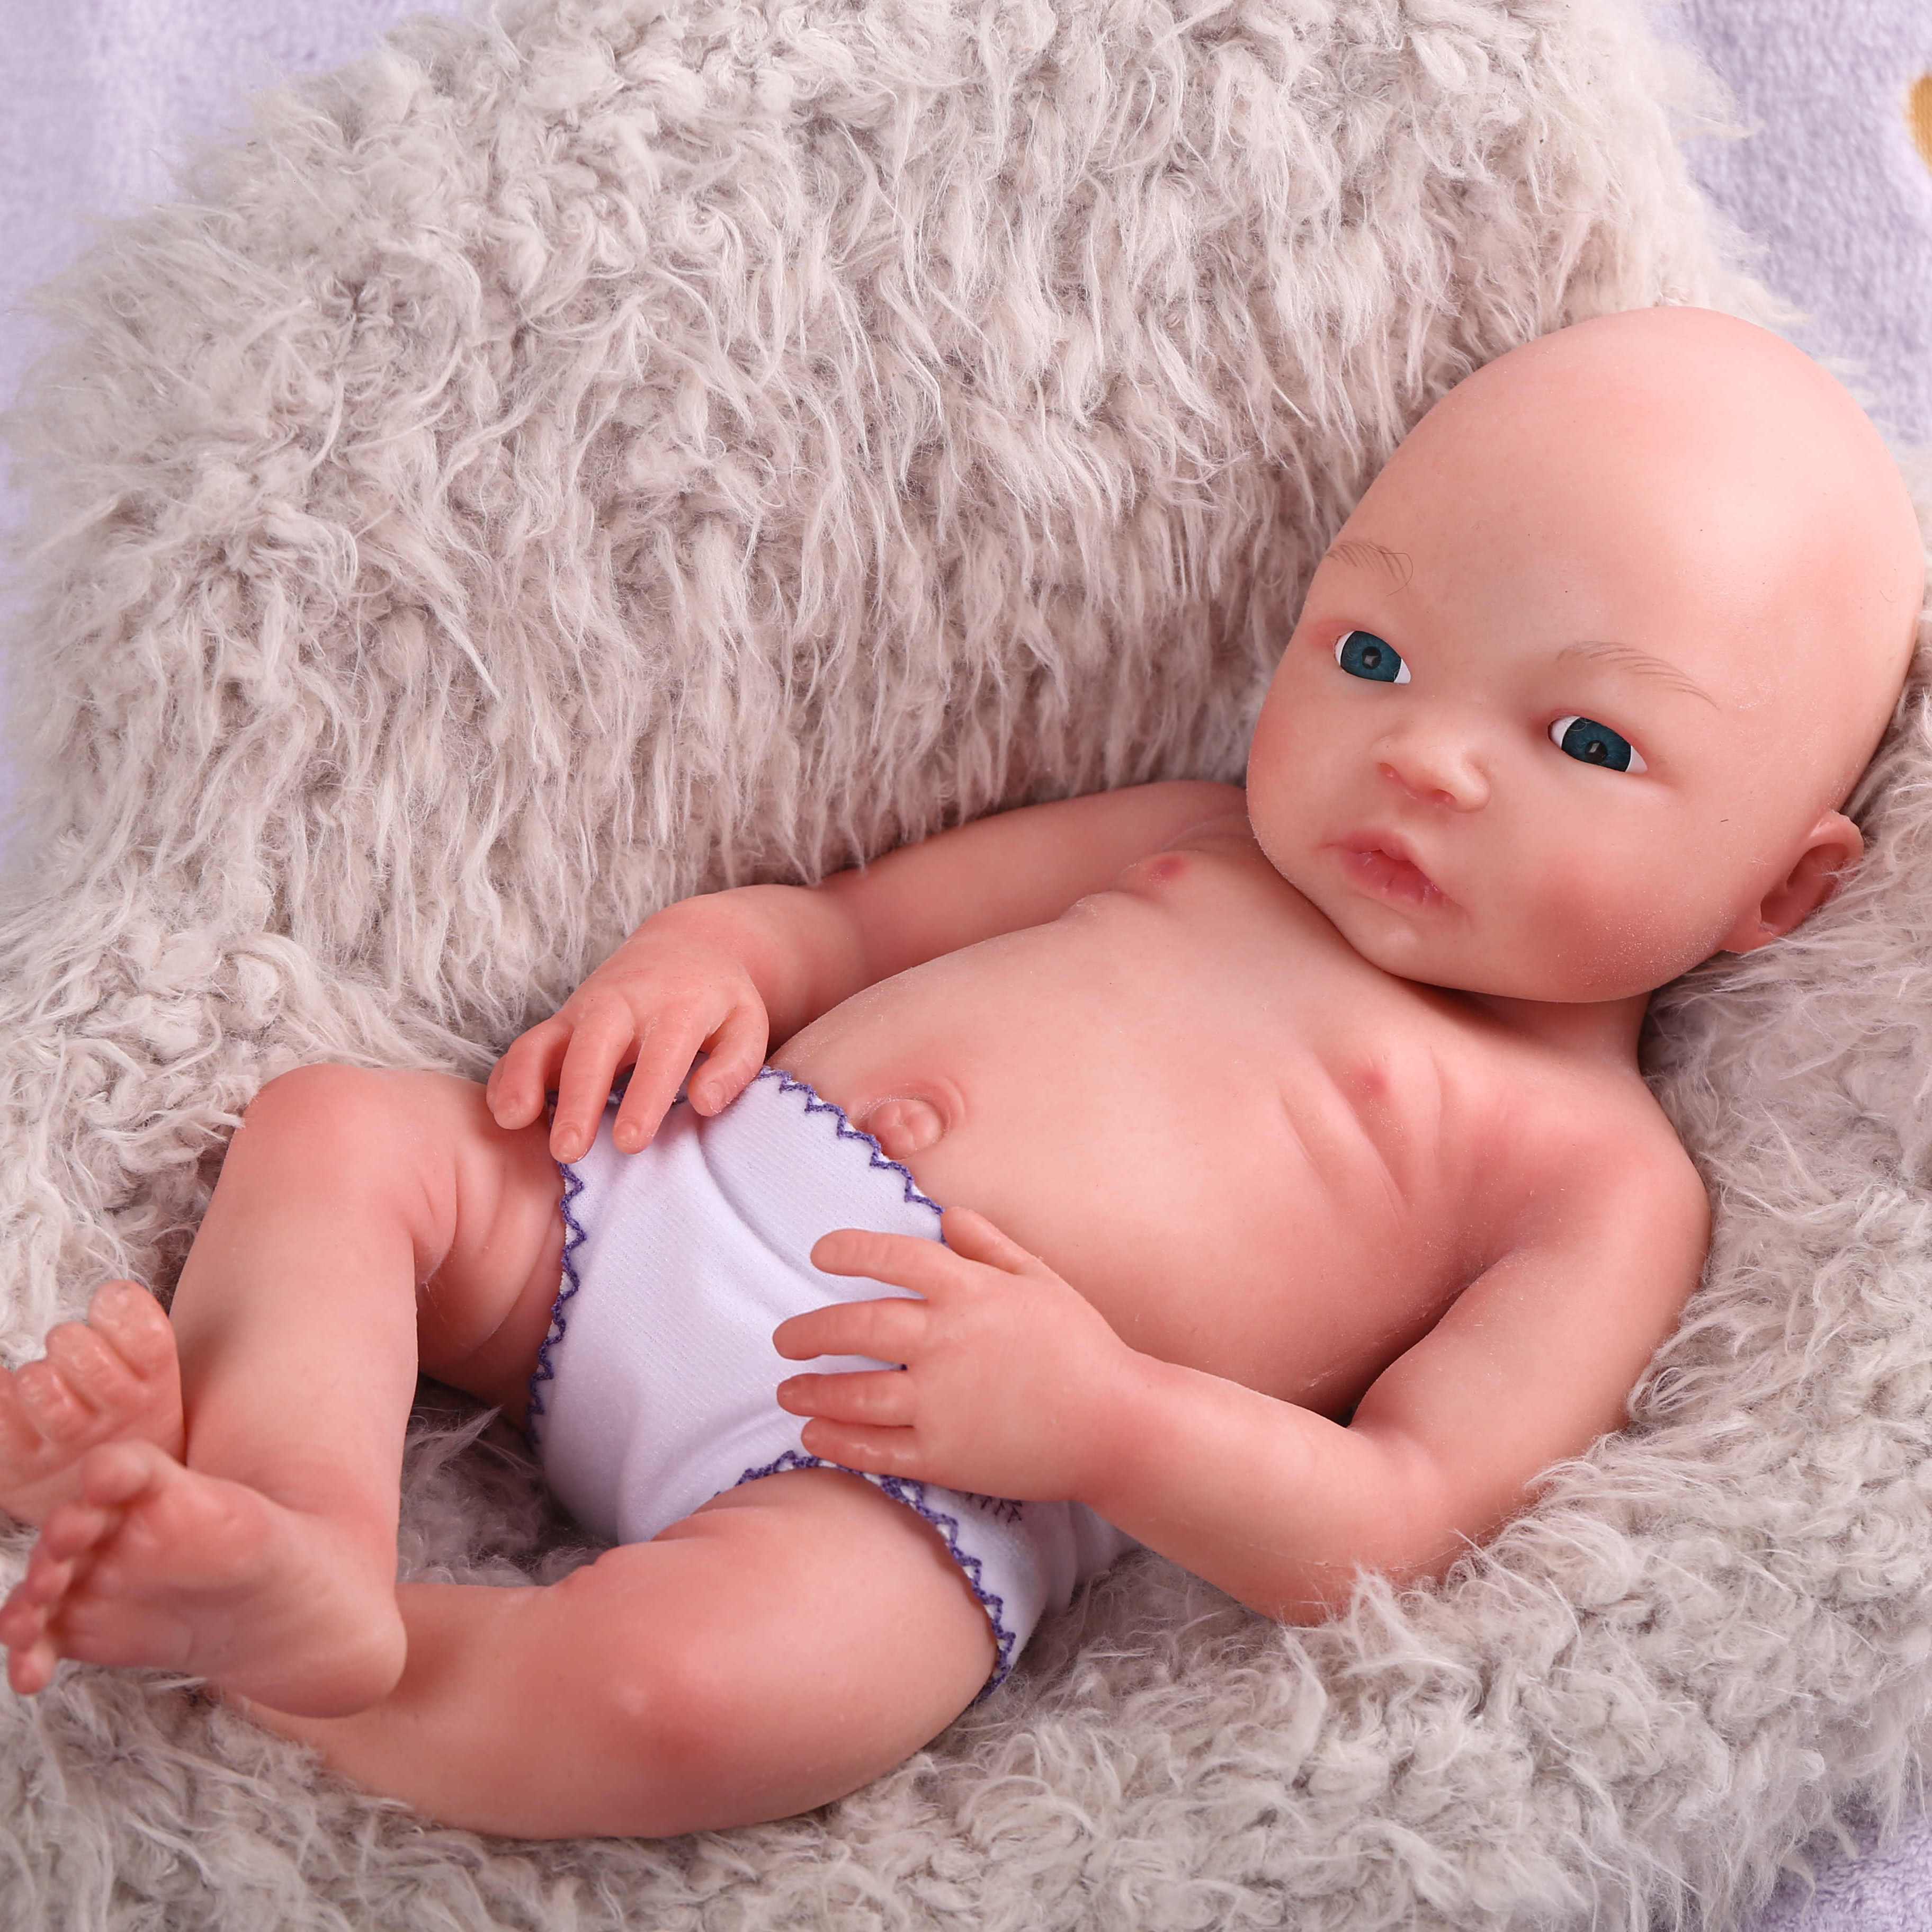 ♥ Thistleberry Babies Full Body Solid Silicone Baby Girl